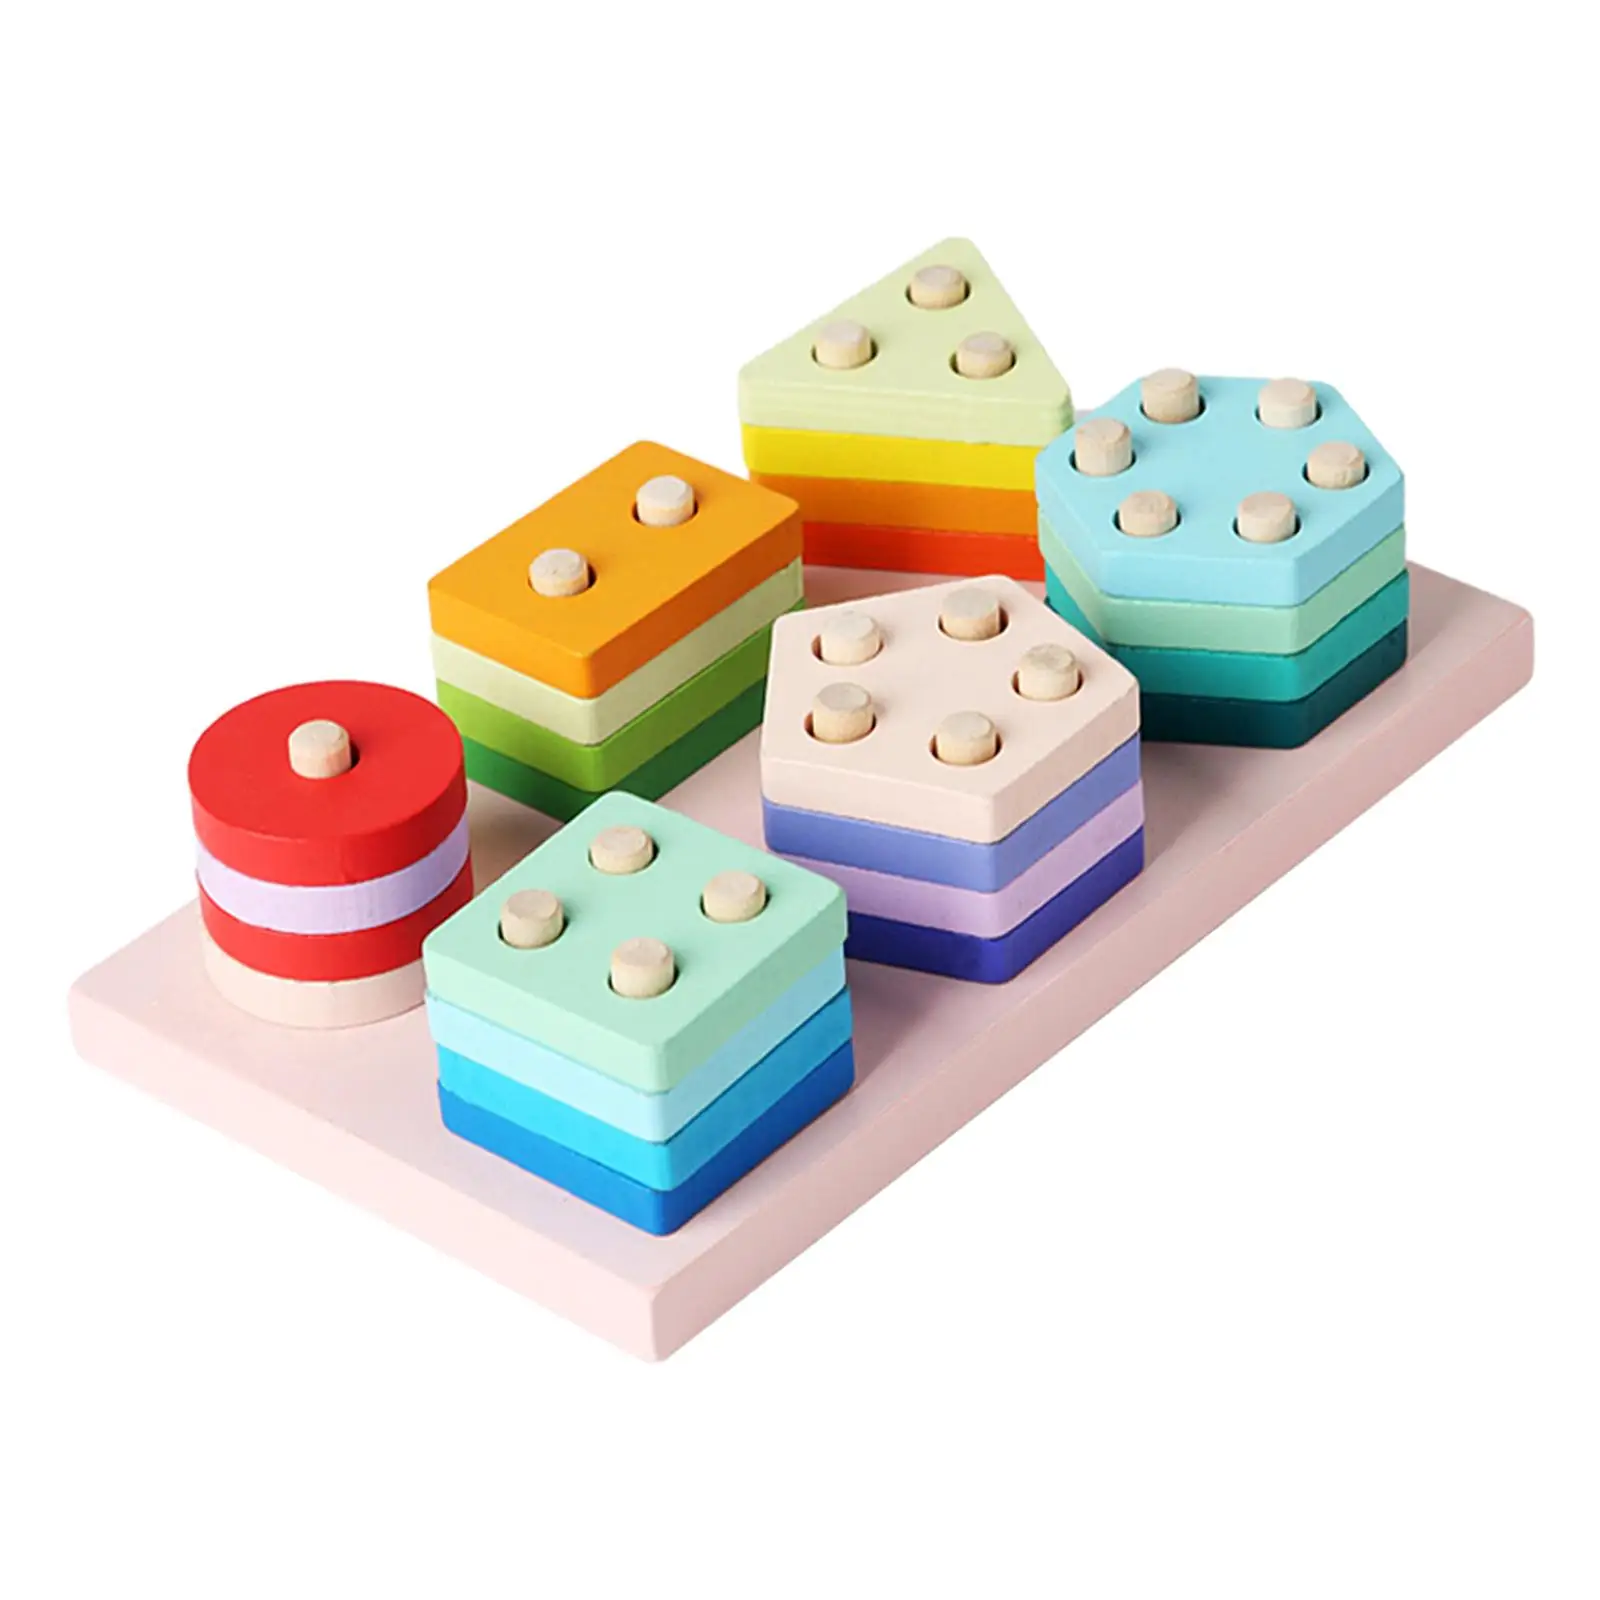 Wooden Sorting Matching Puzzle Educational Toy Geometric Stack Blocks for Travel Toy Ages 3+ Years Old Boys Girls Children